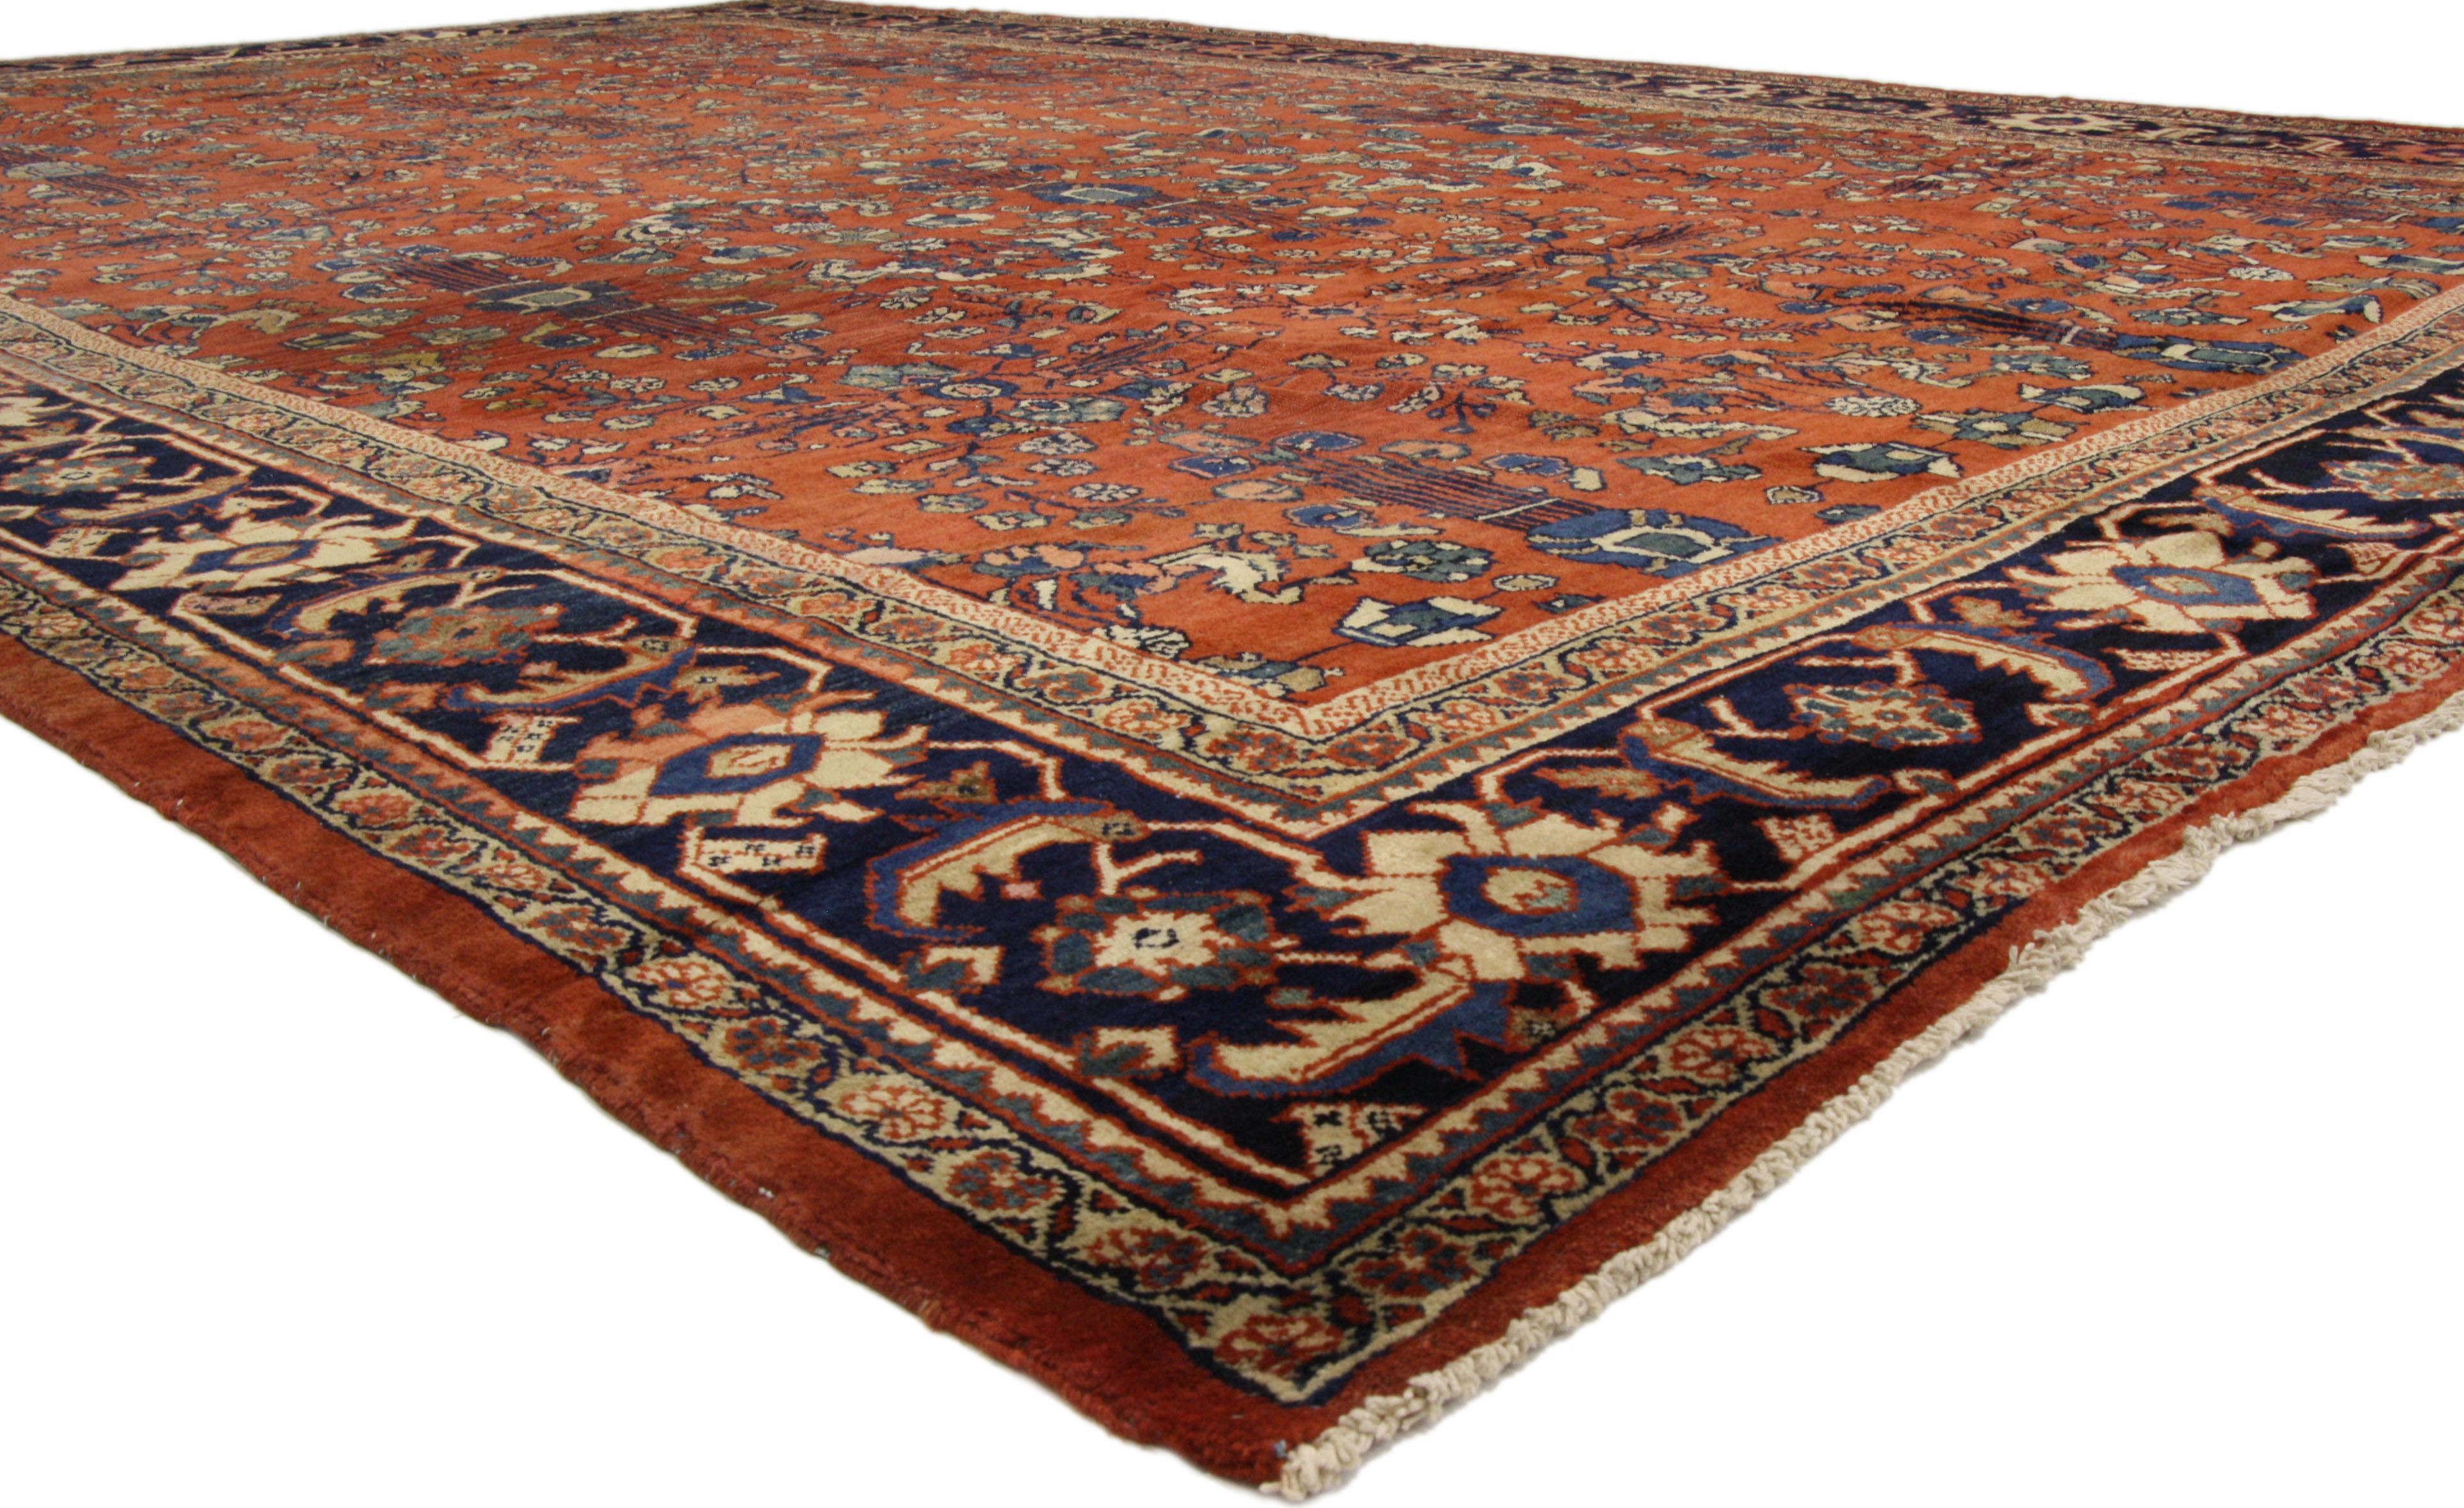 73360 Antique Persian Mahal Rug, 11'01 x 17'07. Persian Mahal rugs, originating from the Mahallat region in central Northwestern Iran, are renowned for their distinctive features and unparalleled craftsmanship. These rugs boast bold geometric